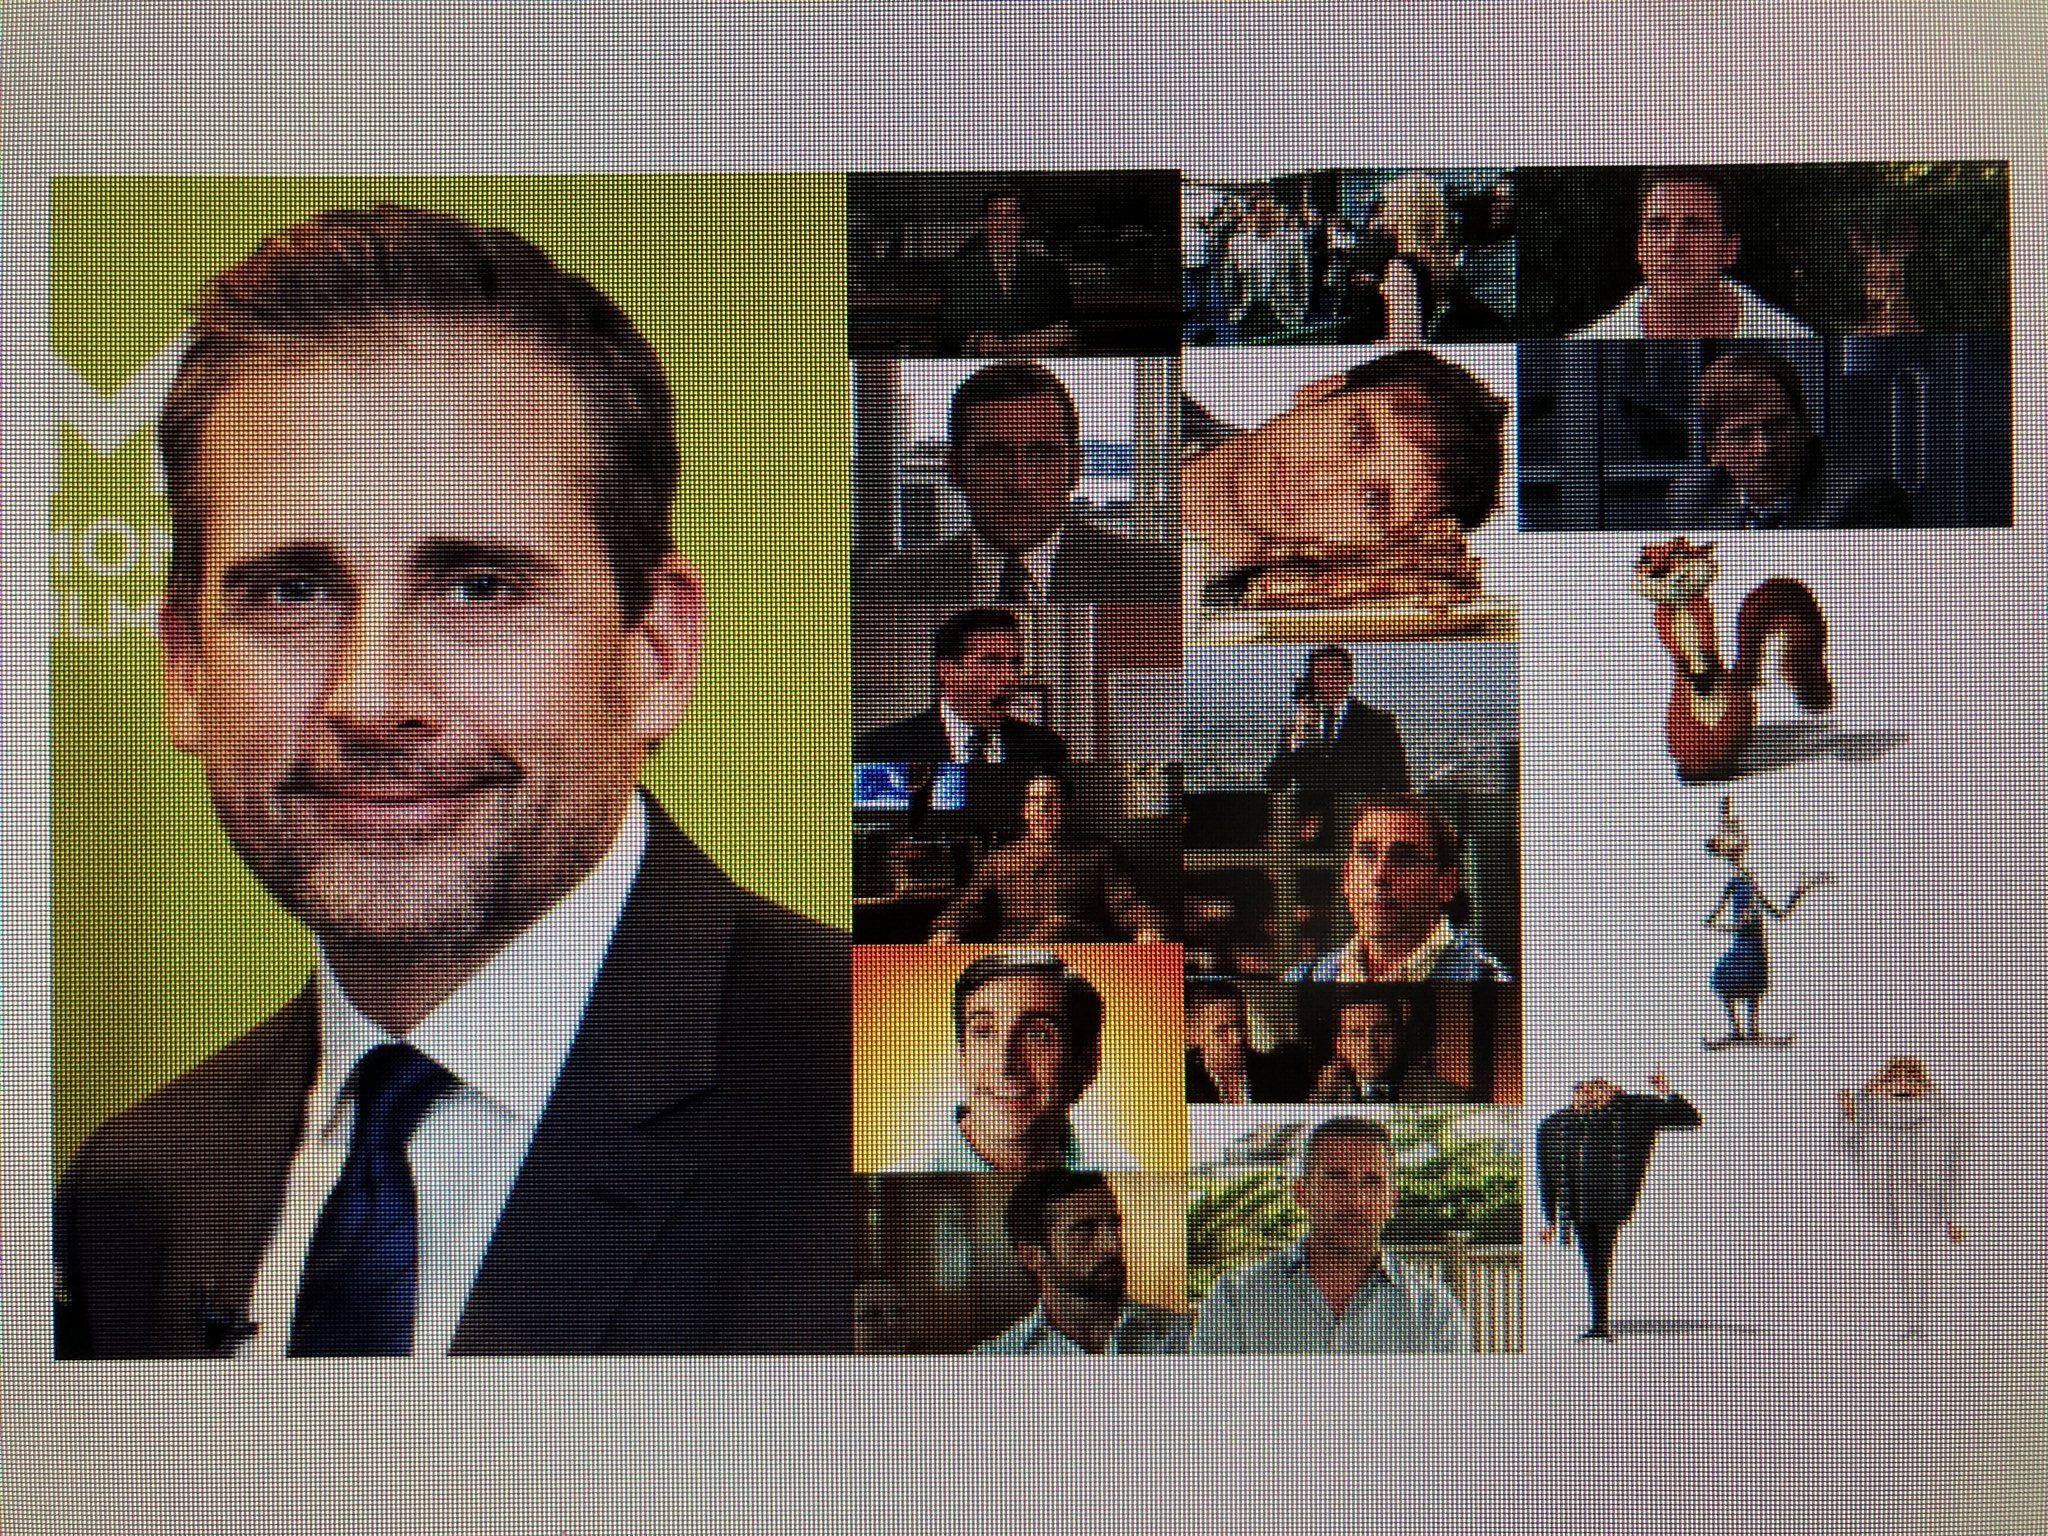 Happy 57th Birthday to actor, comedian, producer, writer, and director, Steve Carell! 